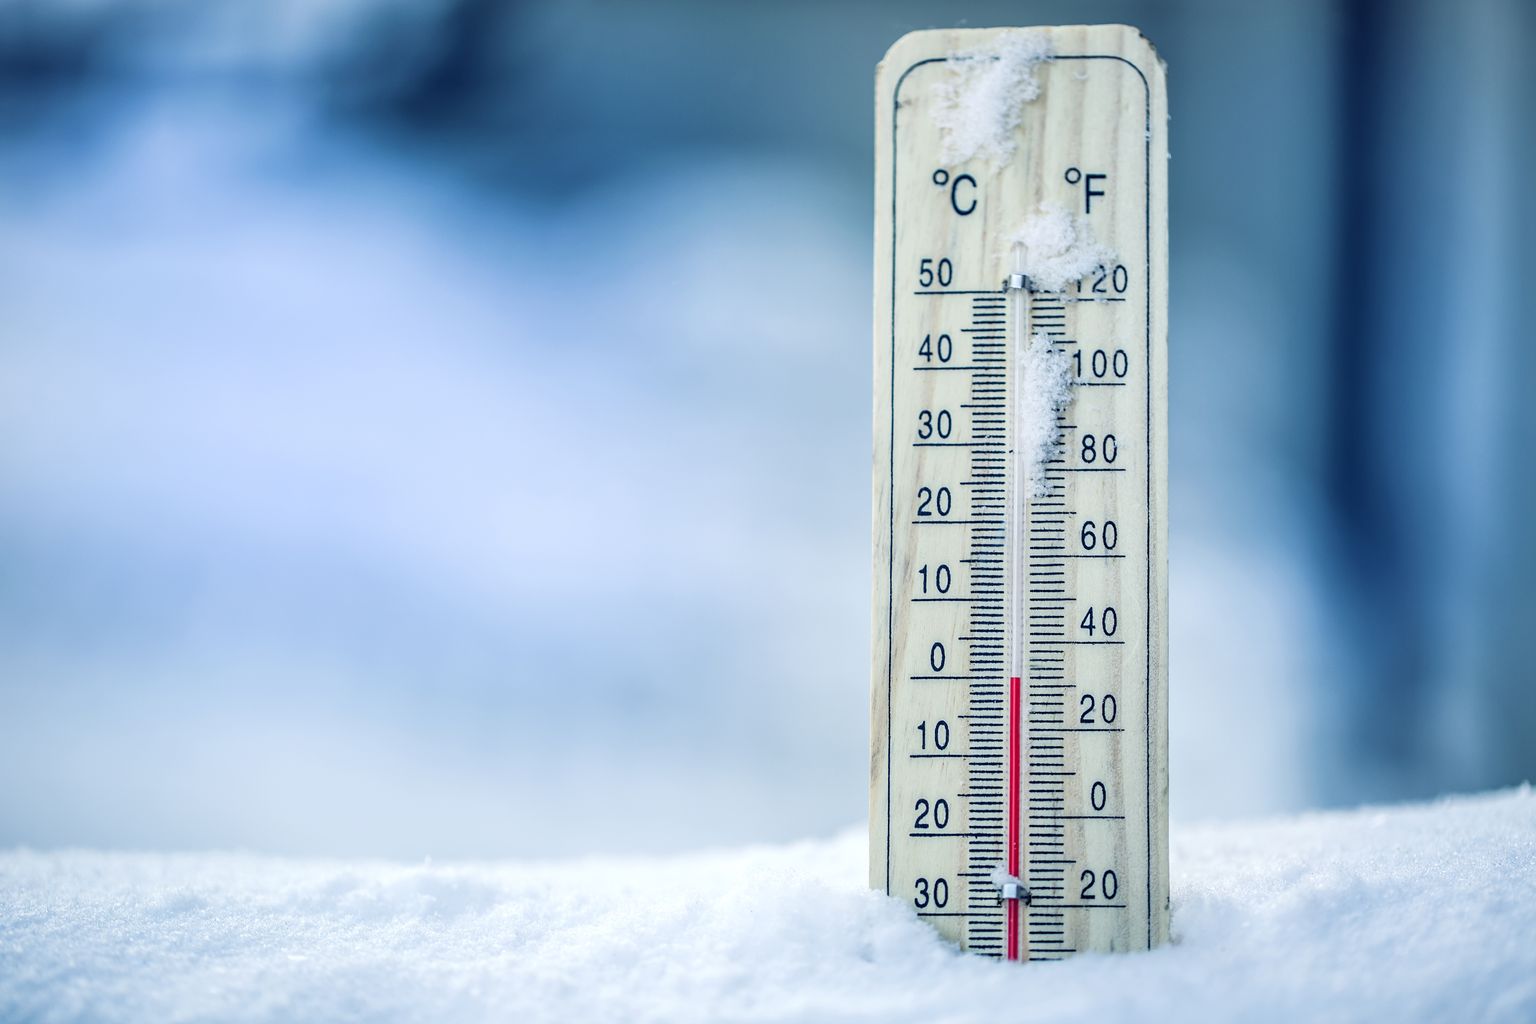 The thermometer on snow shows low temperatures in Celsius or Farenheit.